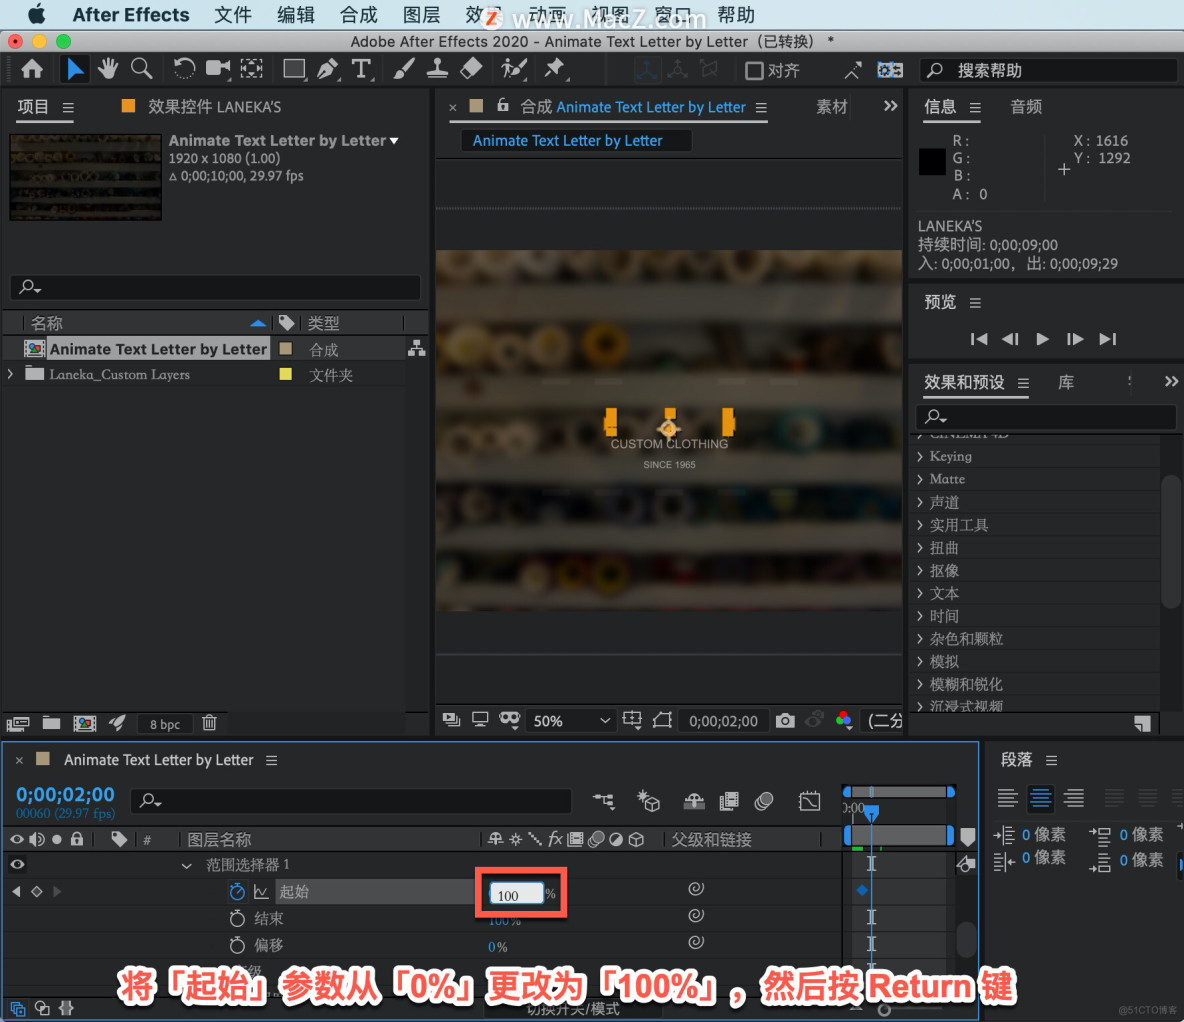 After Effects 教程，如何在 After Effects 中创建每个角色的动画？_After Effects_13